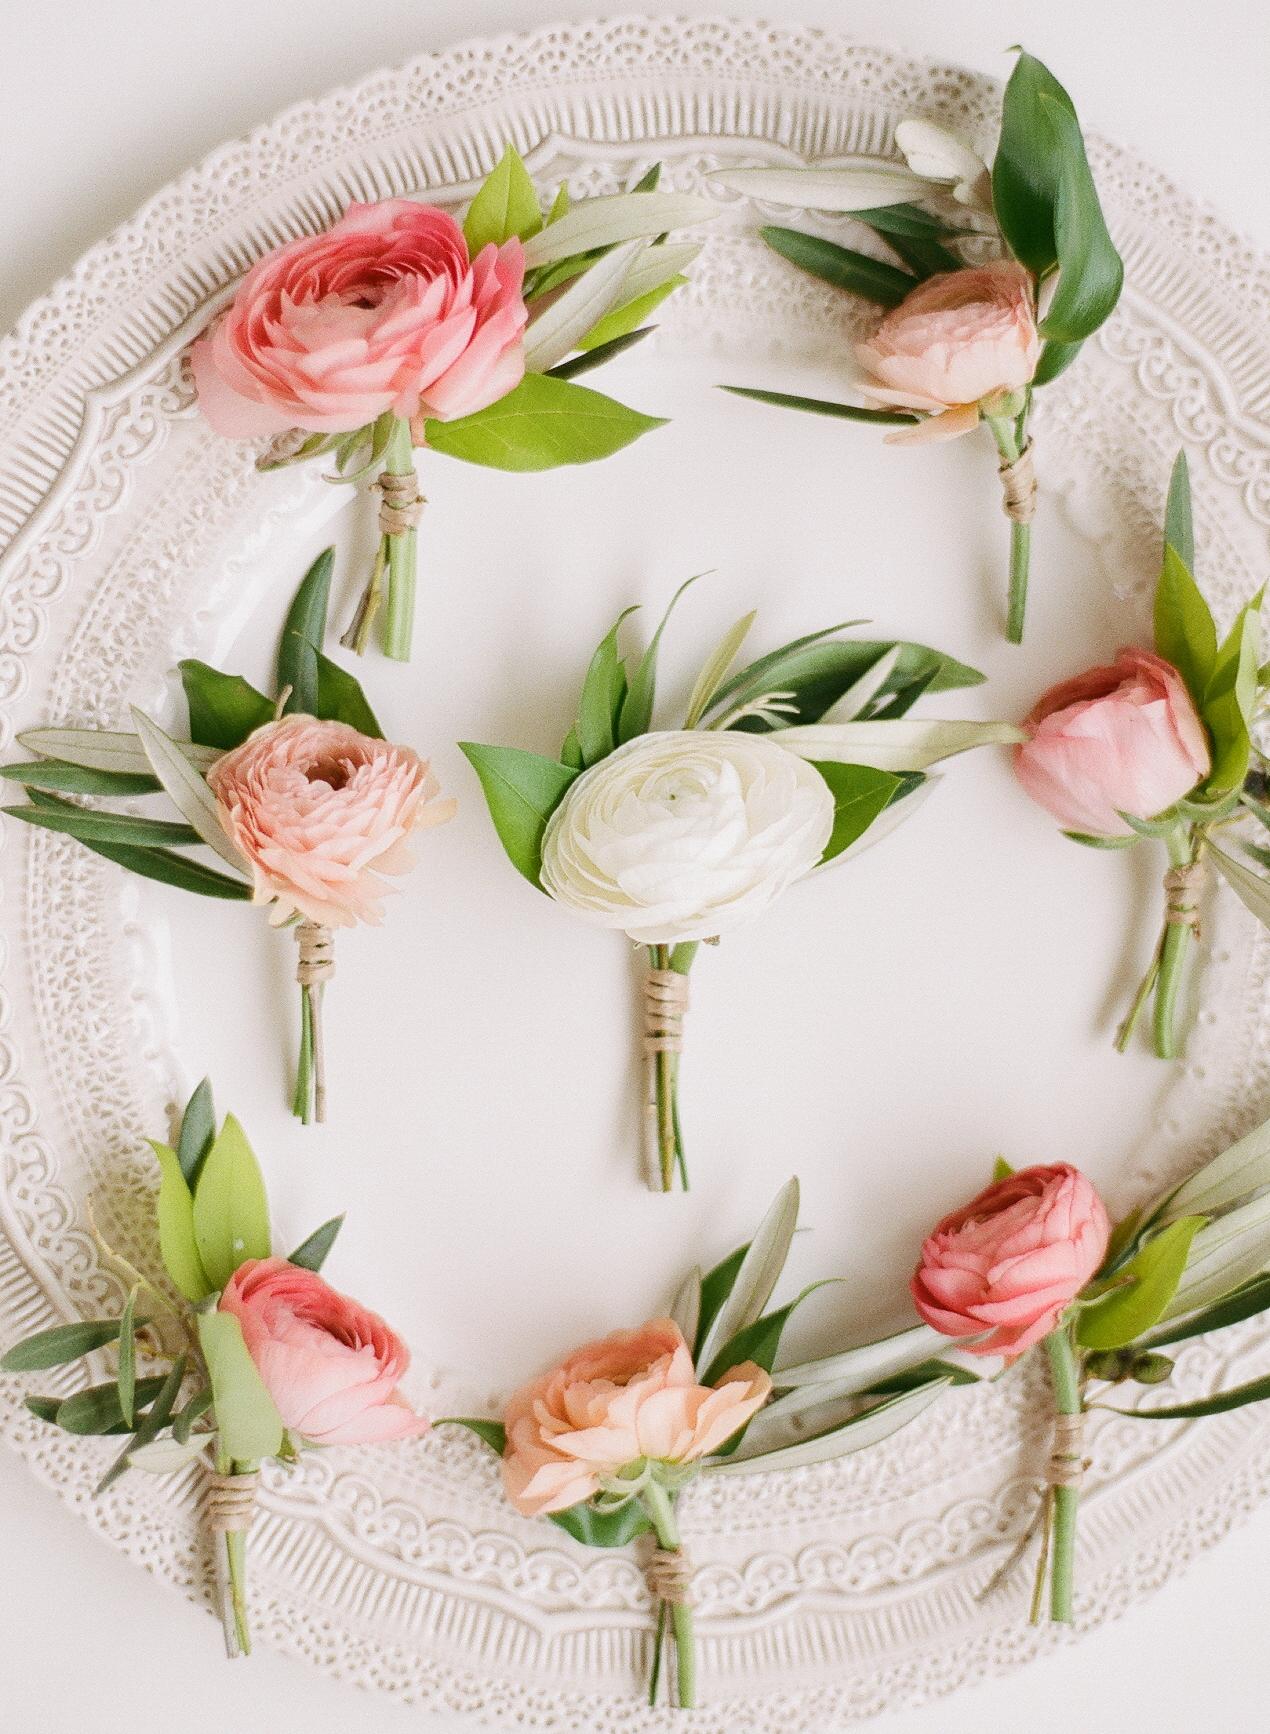 Can You Name These 10 Popular Wedding Flowers?